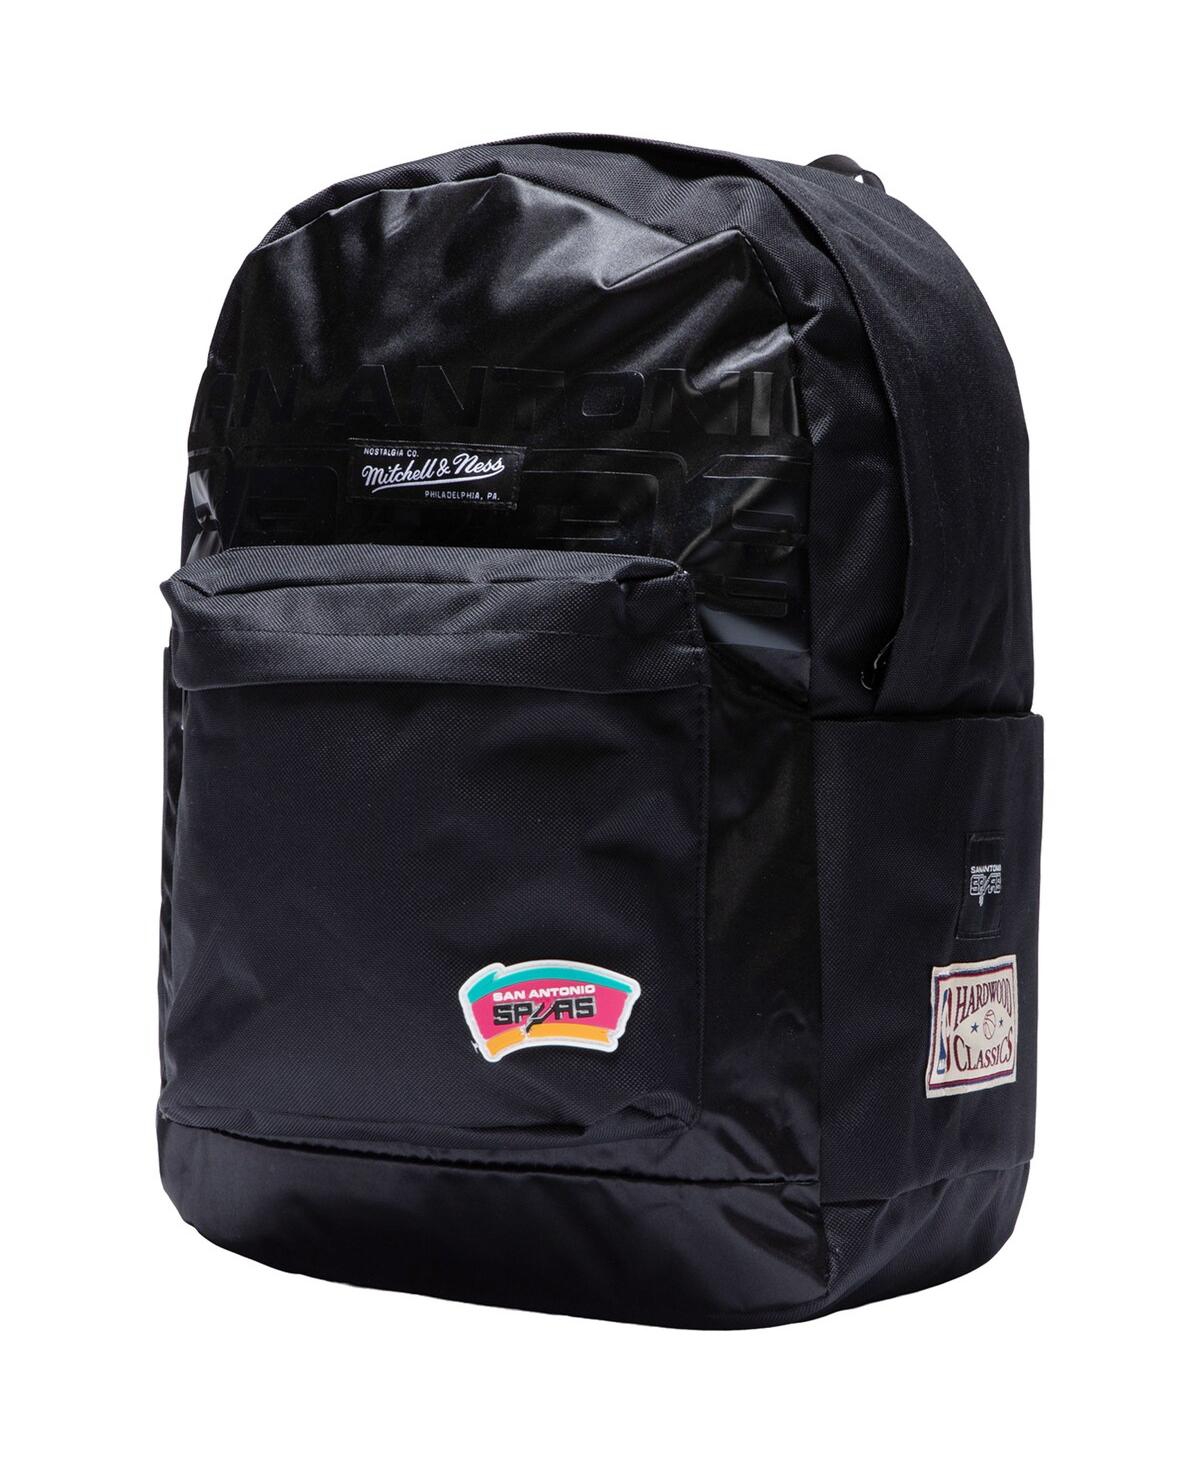 MITCHELL & NESS YOUTH BOYS AND GIRLS MITCHELL & NESS BLACK SAN ANTONIO SPURS TEAM BACKPACK